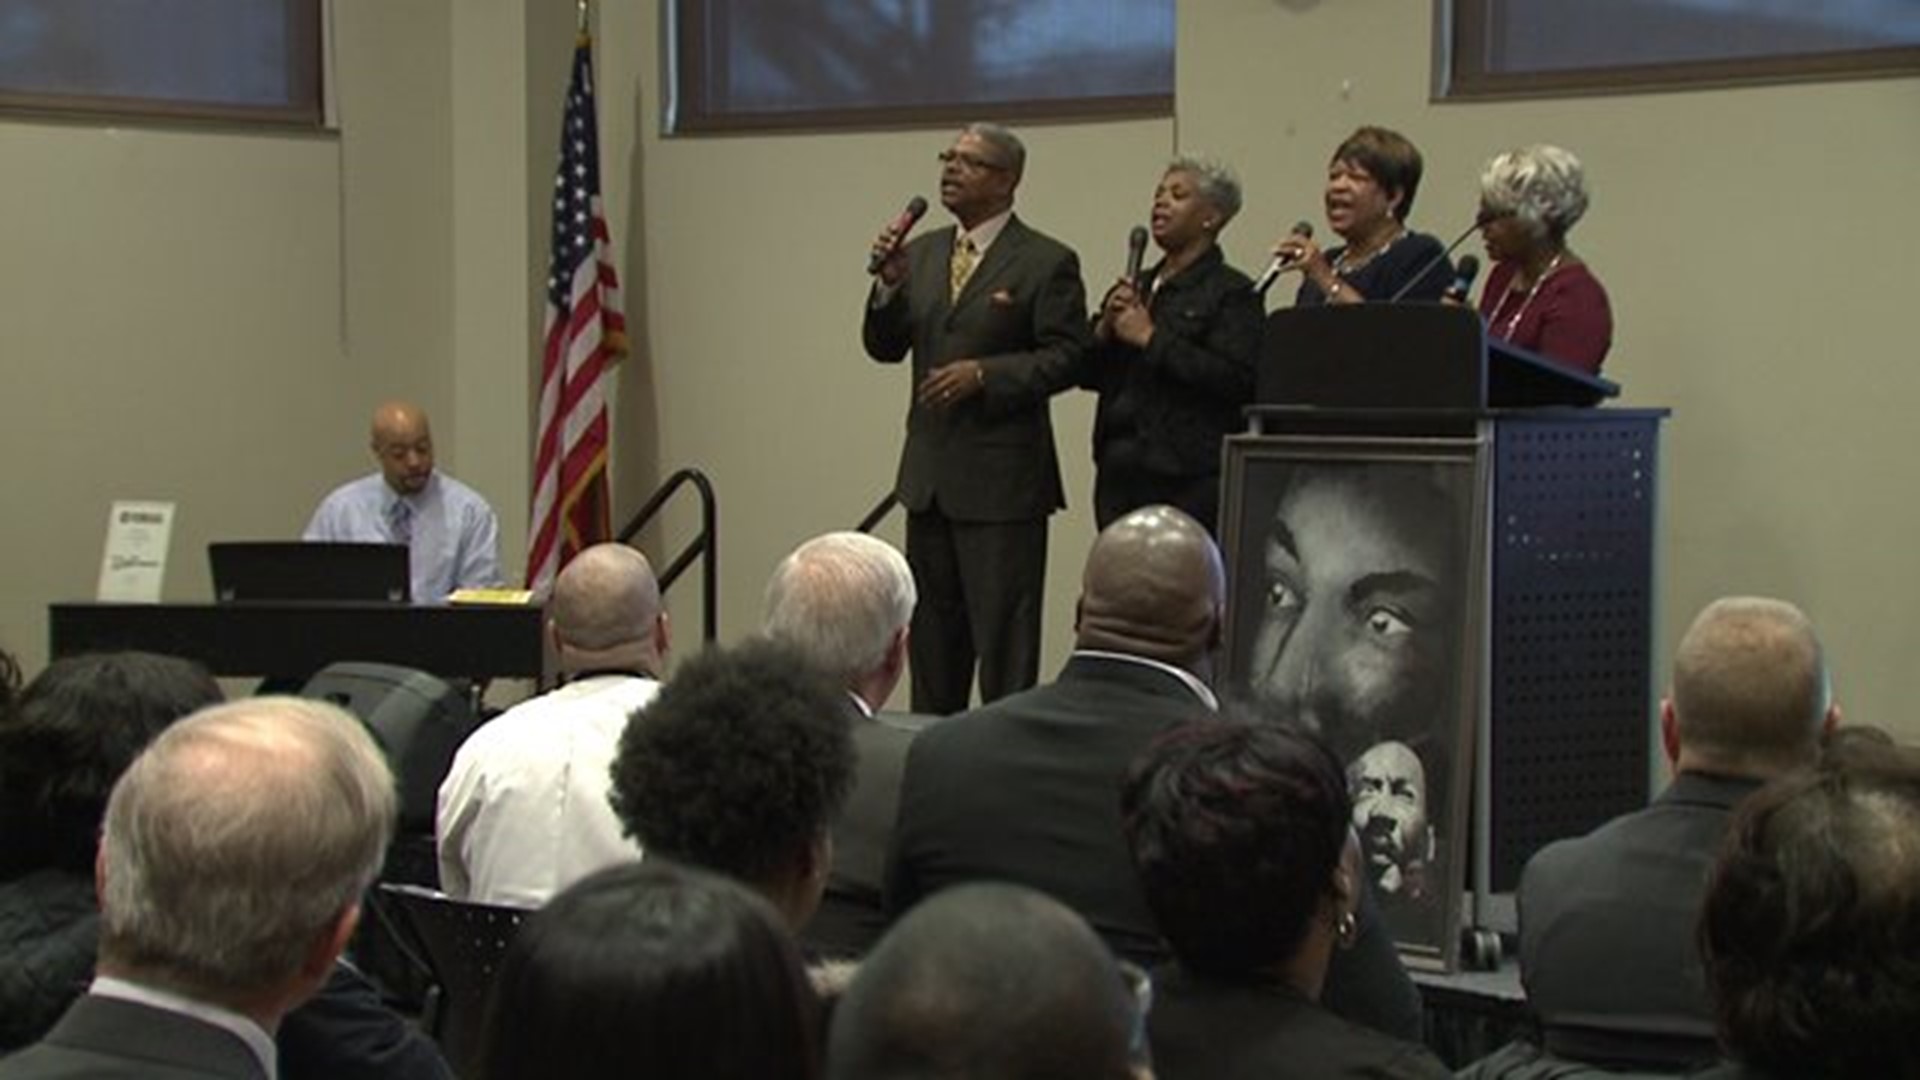 Martin Luther King Jr service in Rock Island brings community together